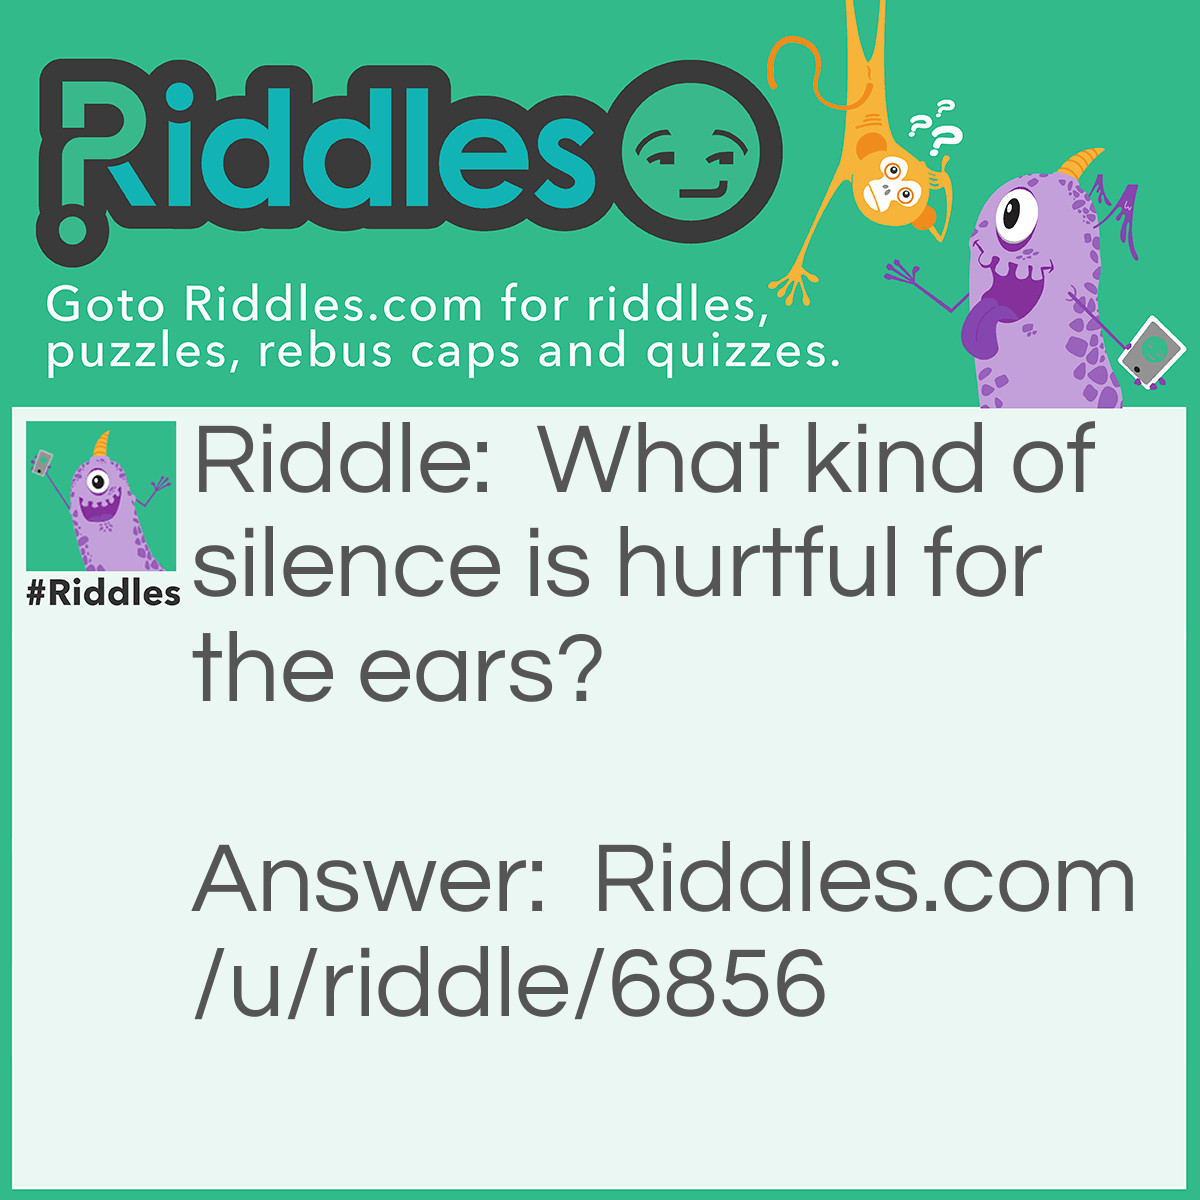 Riddle: What kind of silence is hurtful for the ears? Answer: Deafening silence.